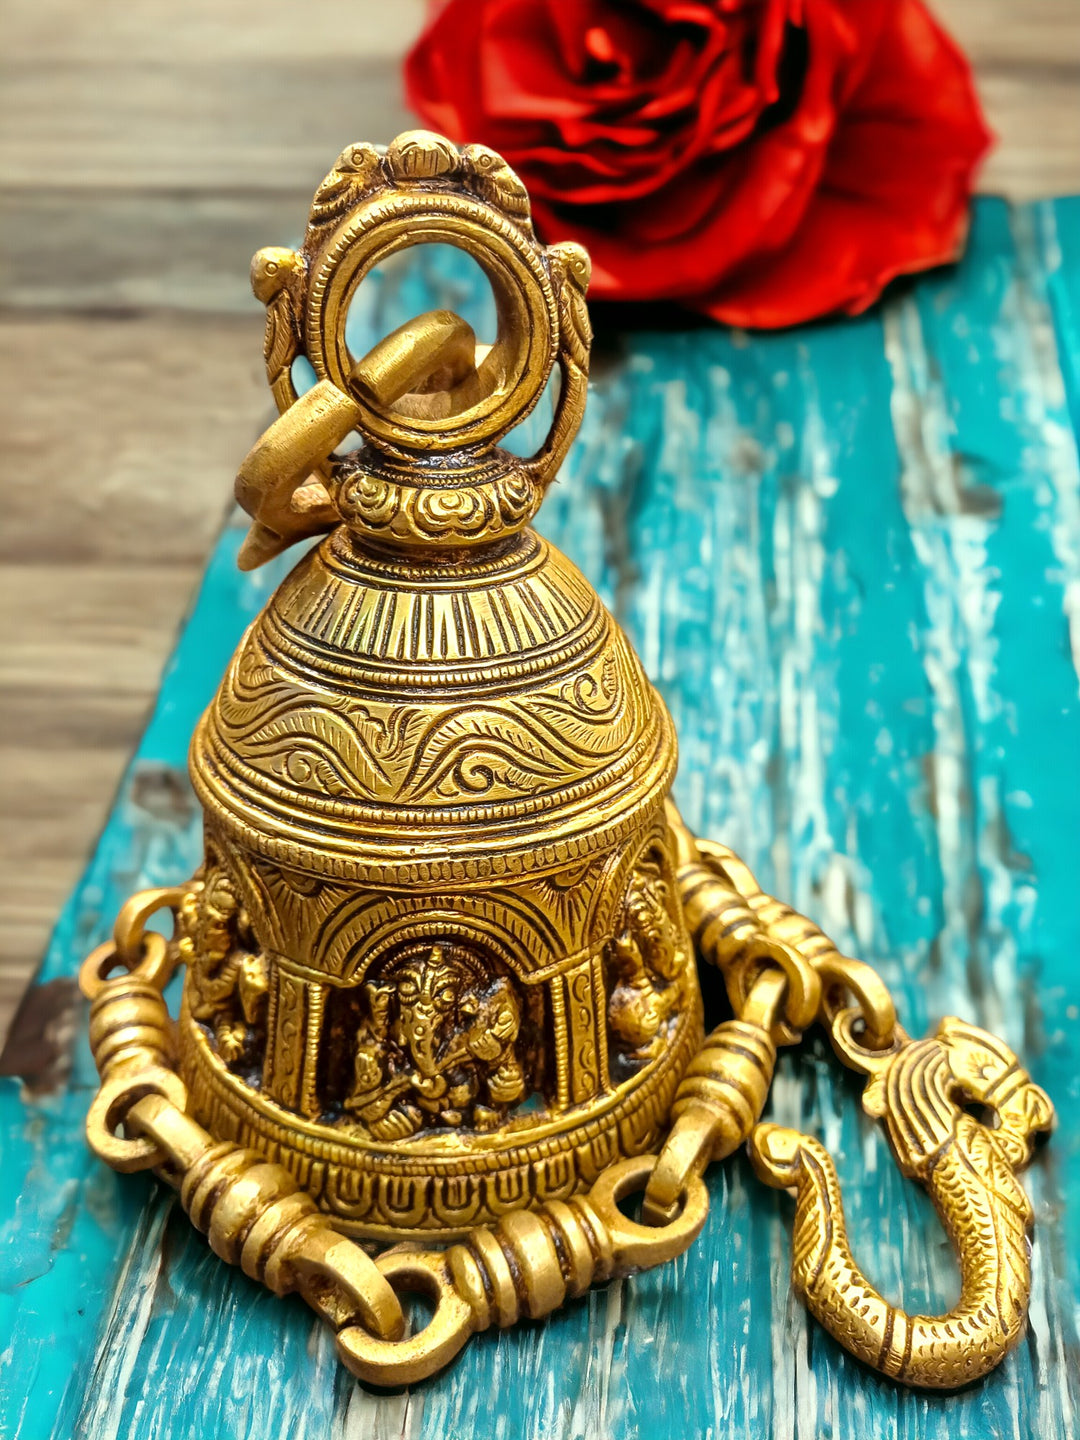 Tamas Brass Ganesha Wall Hanging Temple Bell (32.5 Inches)